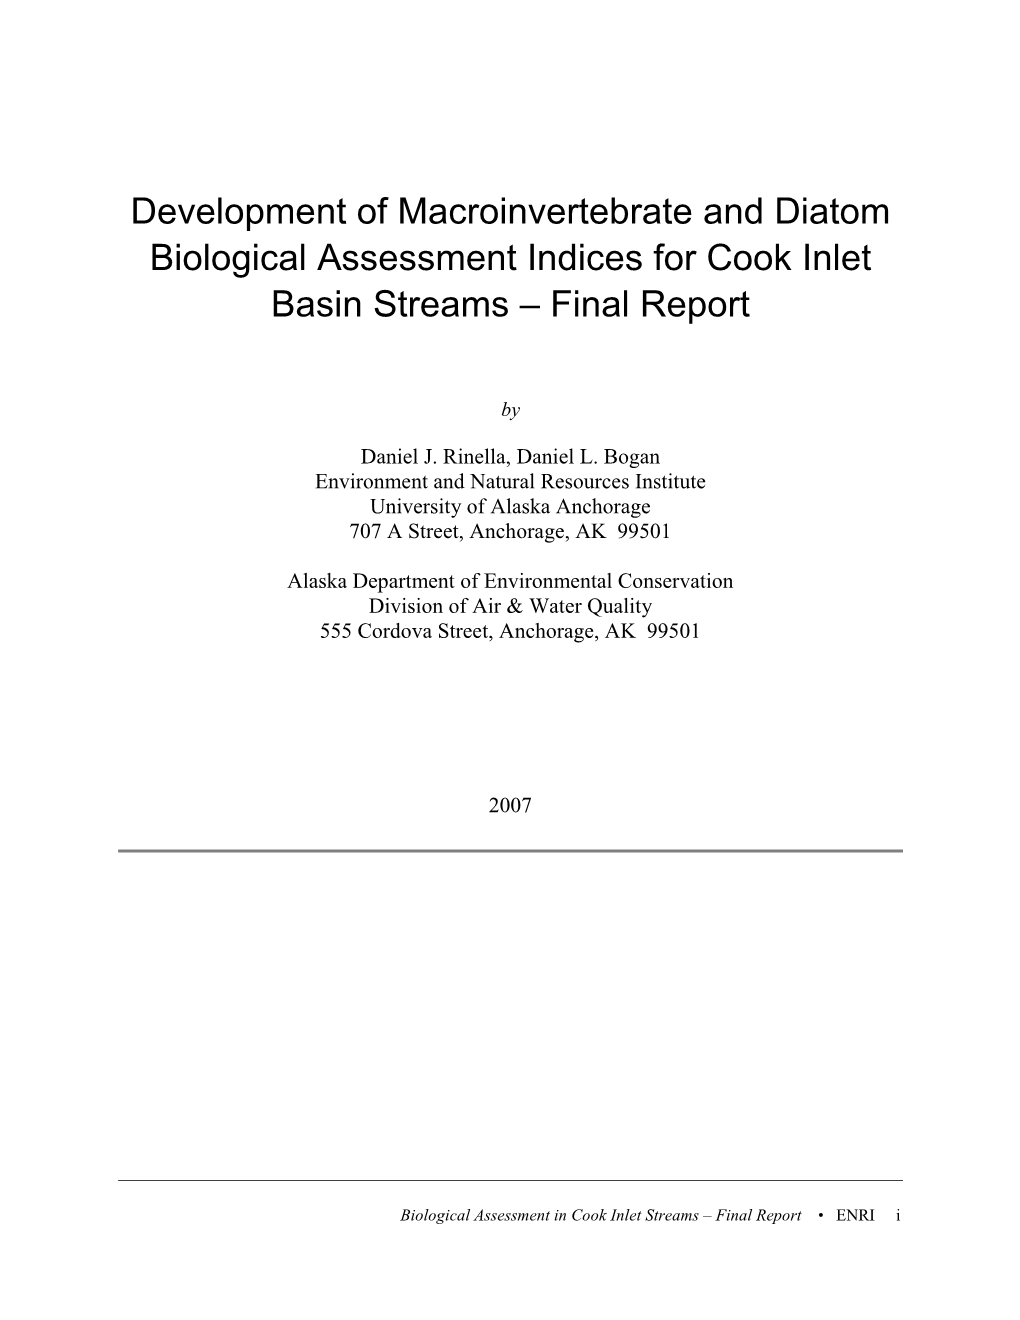 Development of Macroinvertebrate and Diatom Biological Assessment Indices for Cook Inlet Basin Streams – Final Report